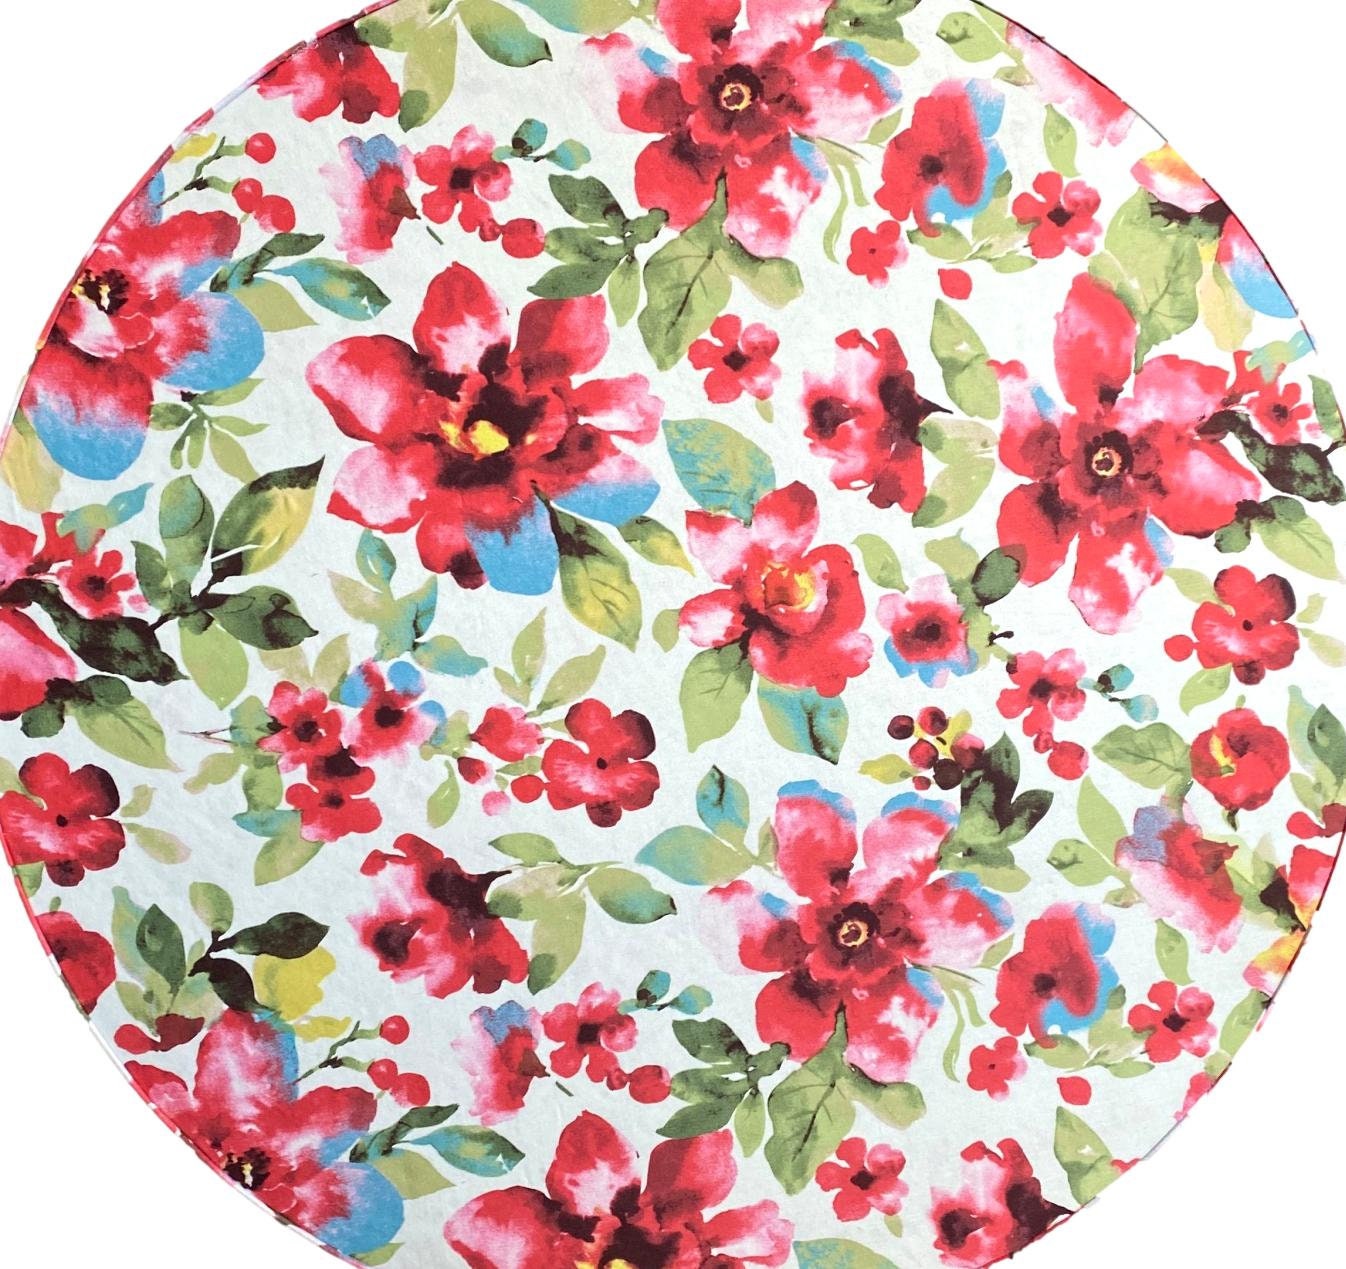 Extra Large 19” Hat Box in Multi-Color Floral, Decorative Covered